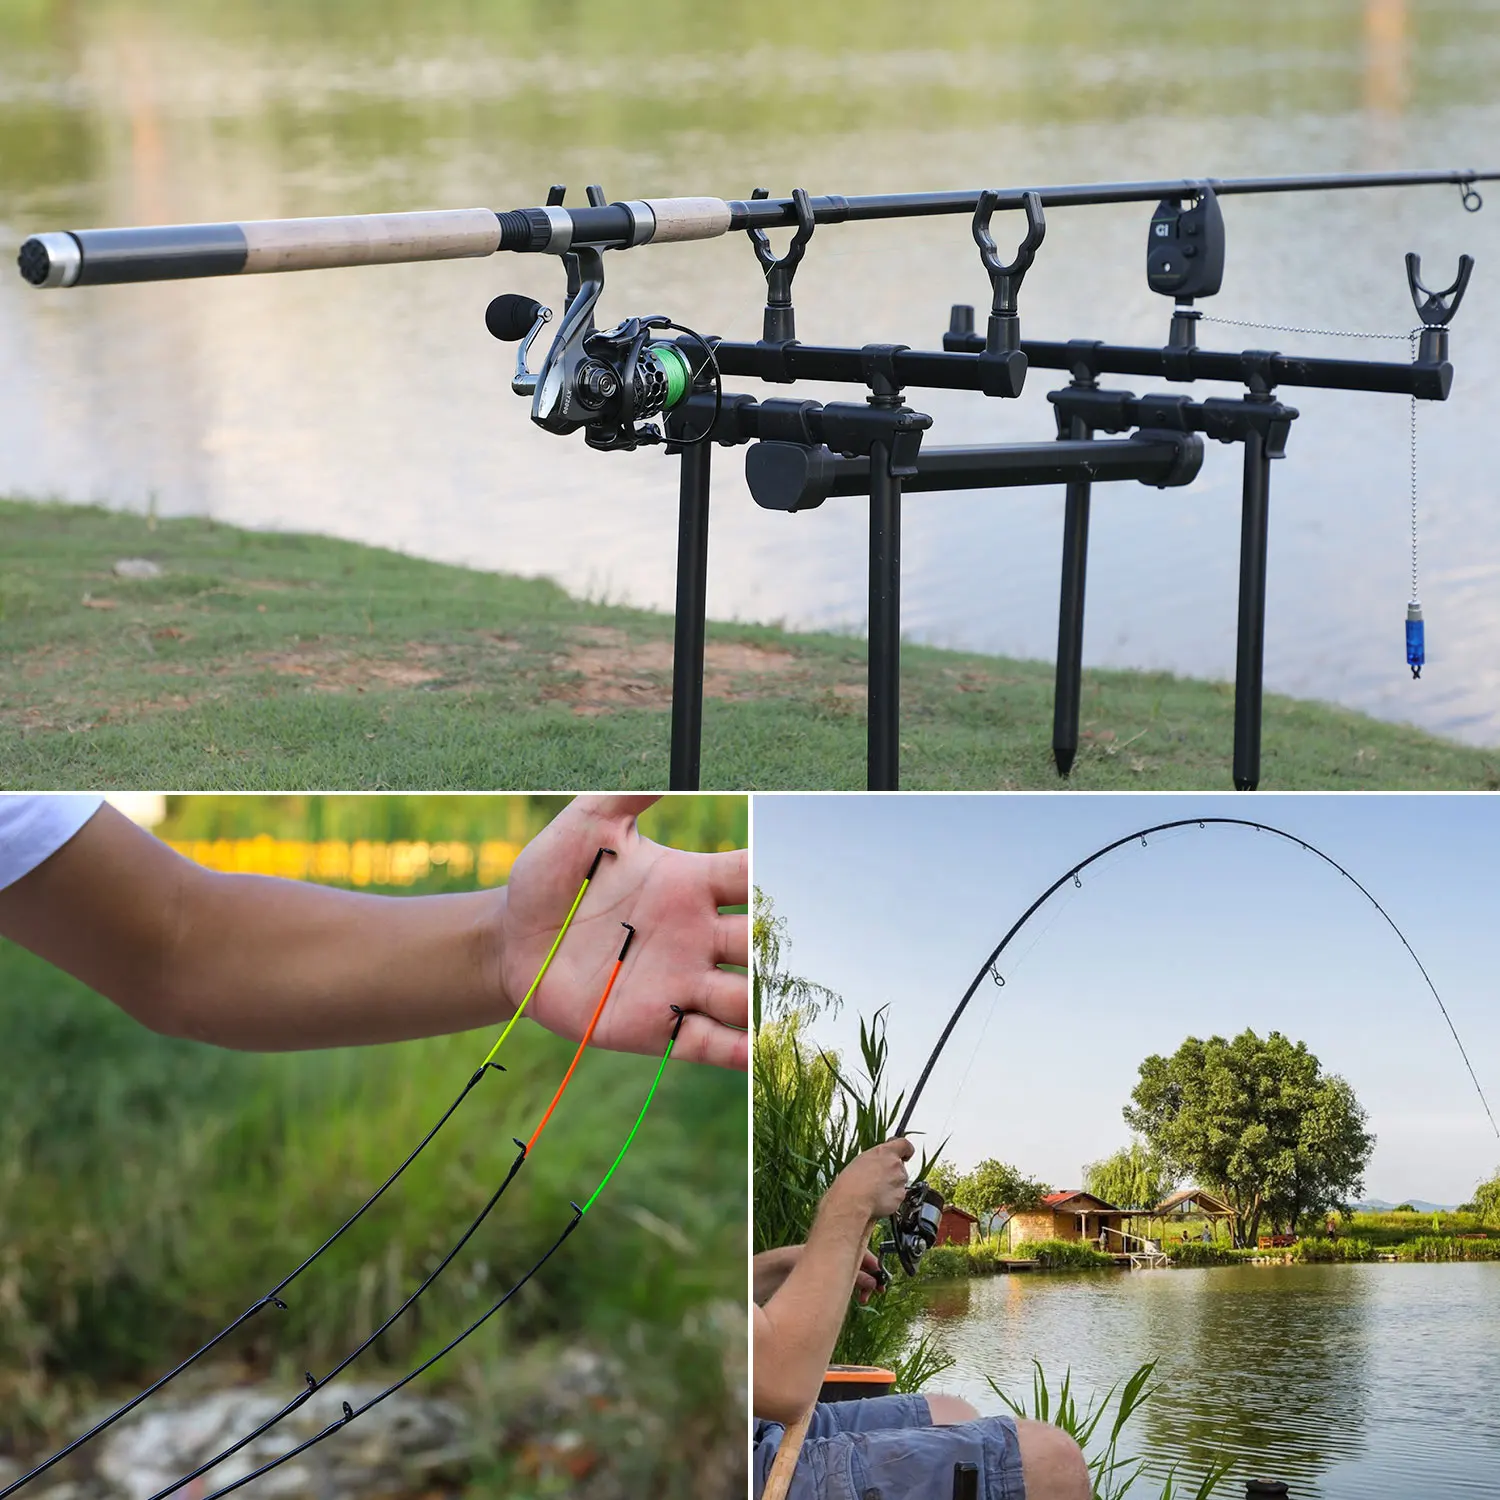 

Sougayilang Telescopic Spinning/6 Sections Travel Feeder Rod 3.0m 3.3m 3.6m Pesca Carp Feeder 60-180g Pole Fish Tackle